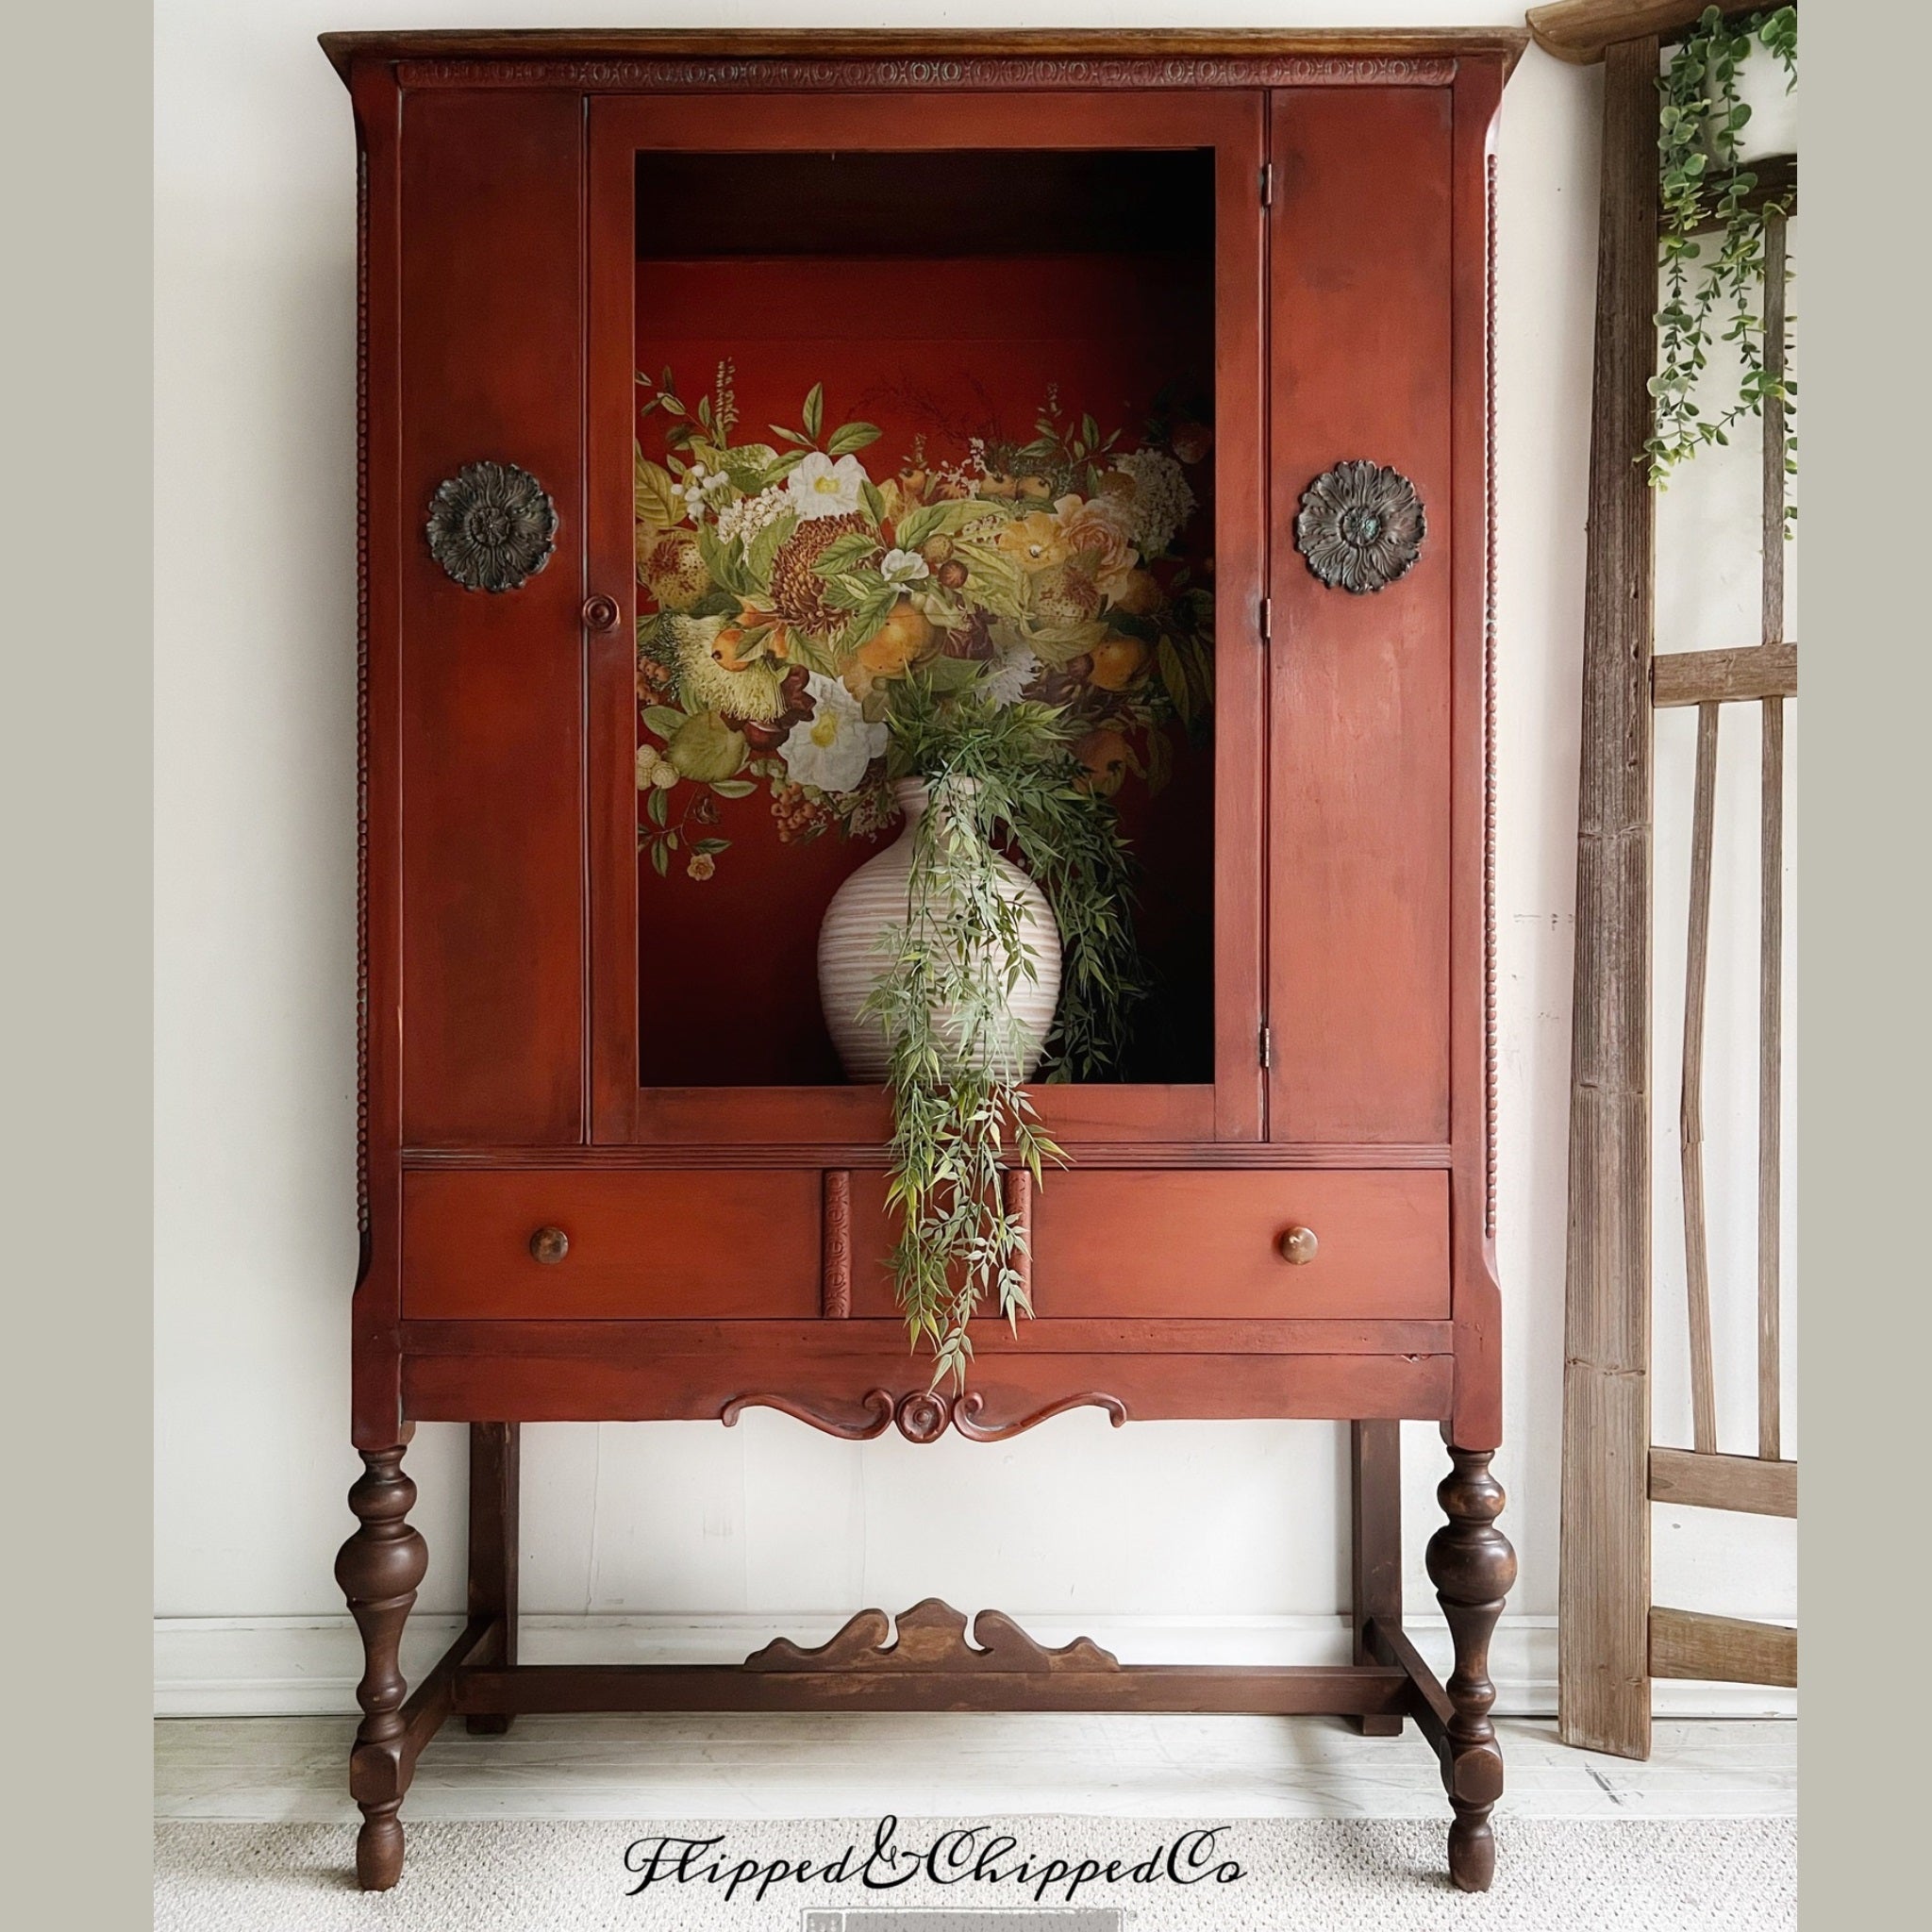 A vintage armoire refurbished by Flipped & Chipped Co. is painted a rust red and features ReDesign with Prima's Harvest Hues transferon the backboard inside the armoire.